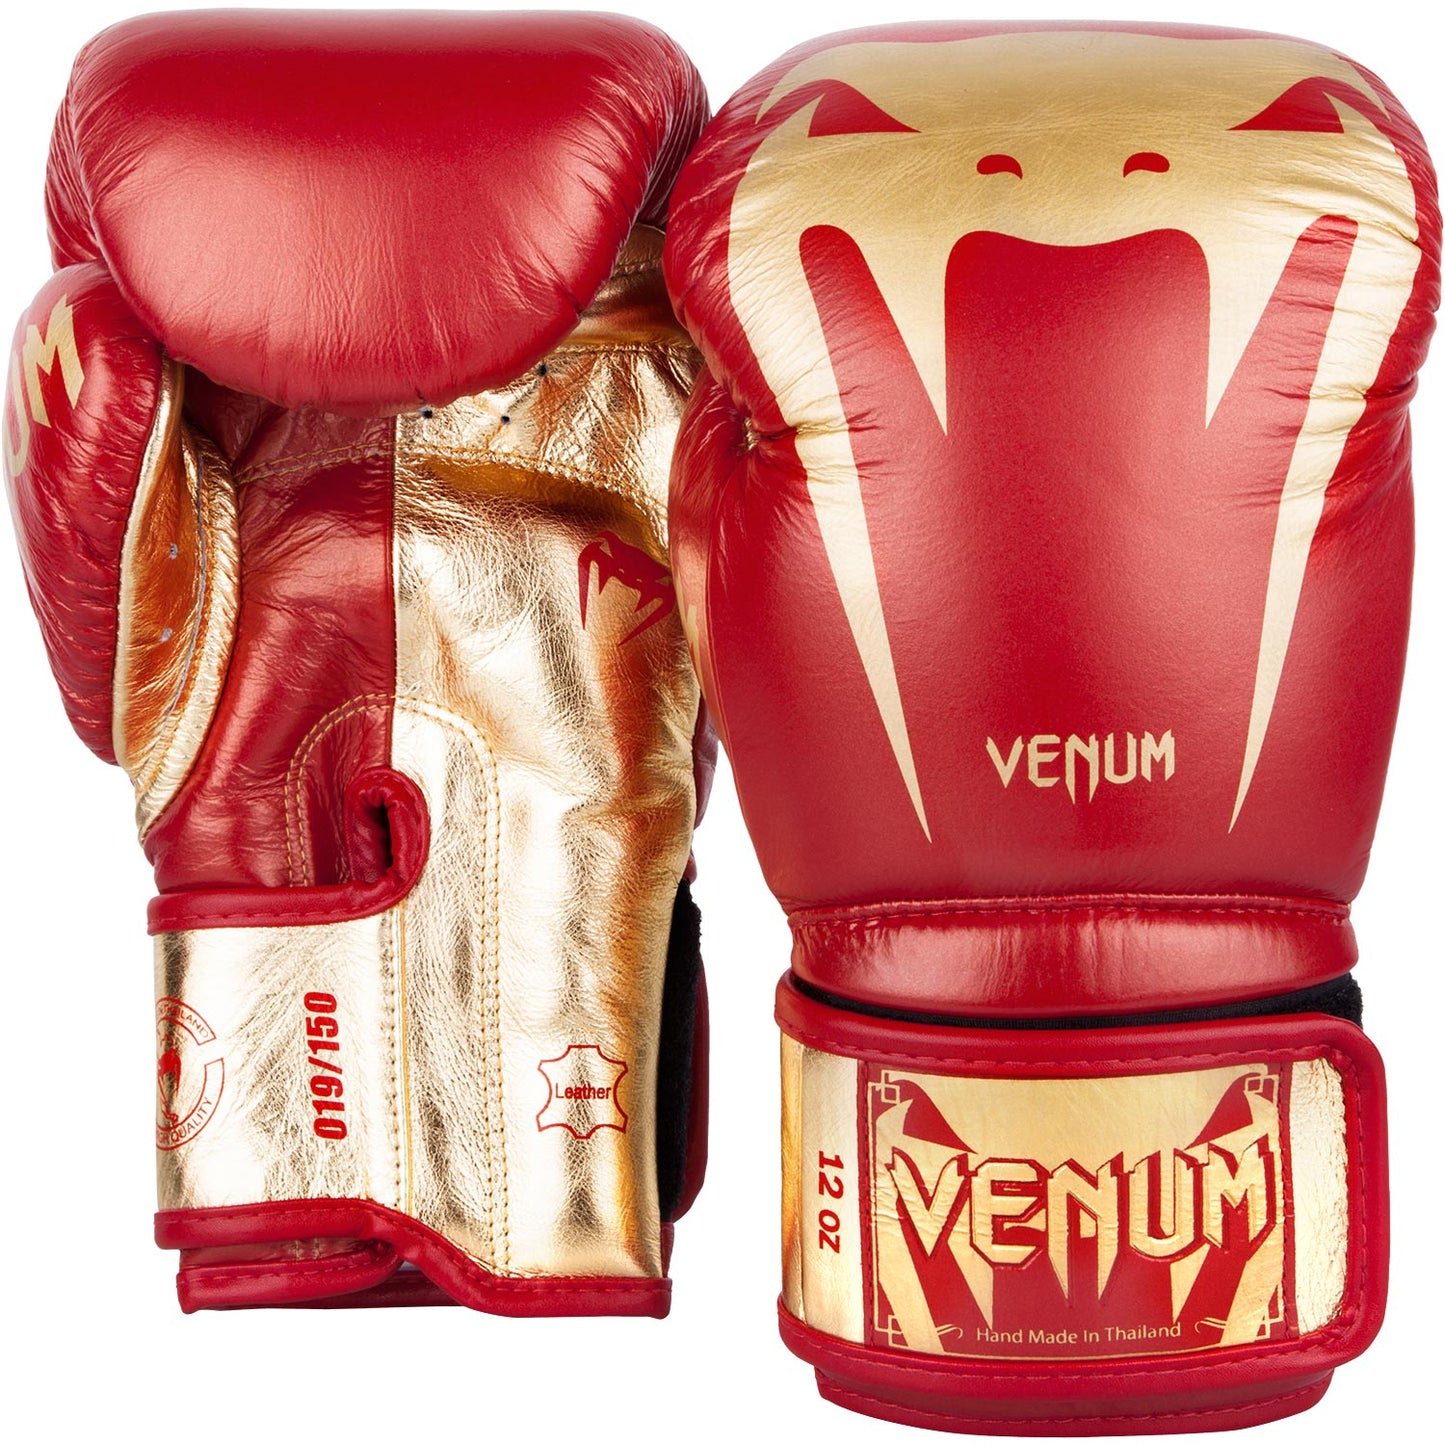 Venum Giant 3.0 Boxing Gloves Blood & Gold - Limited Edition - Nappa Leather